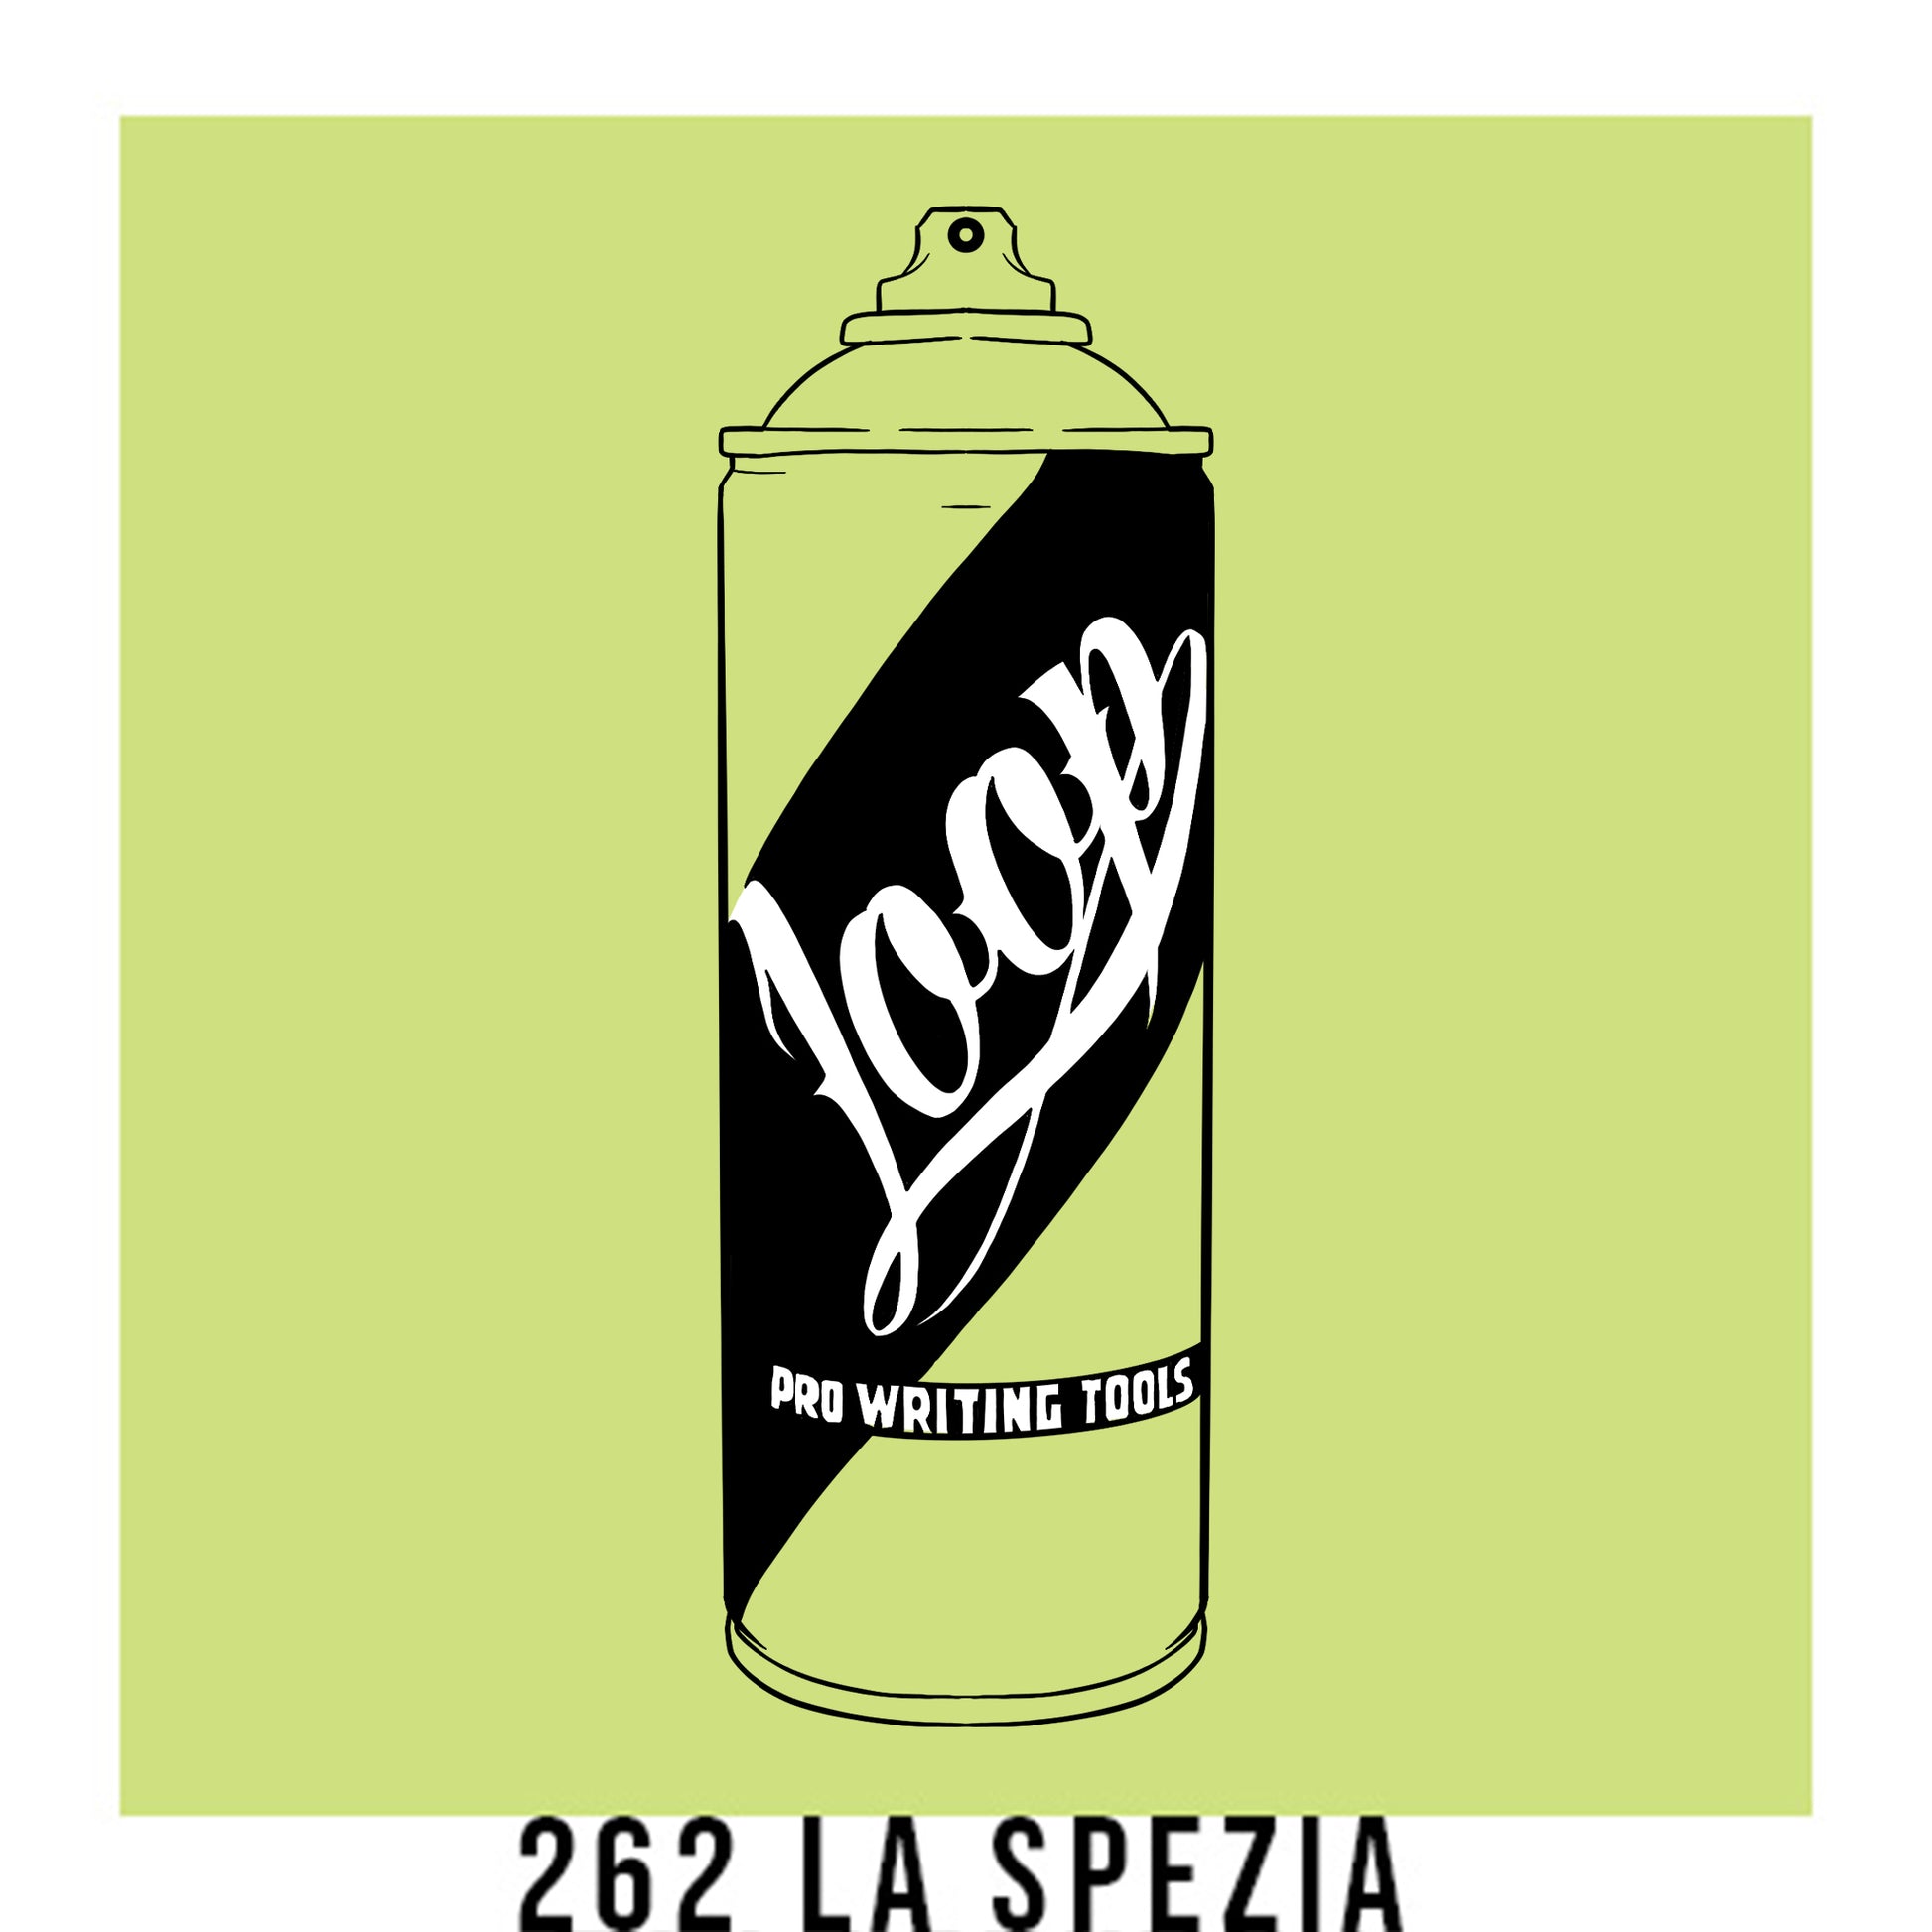 A black outline drawing of a Lime Green spray paint can with the word "Loop" written on the face in script. The background is a color swatch of the same Lime Green with a white border with the words "262 la spezia" at the bottom.